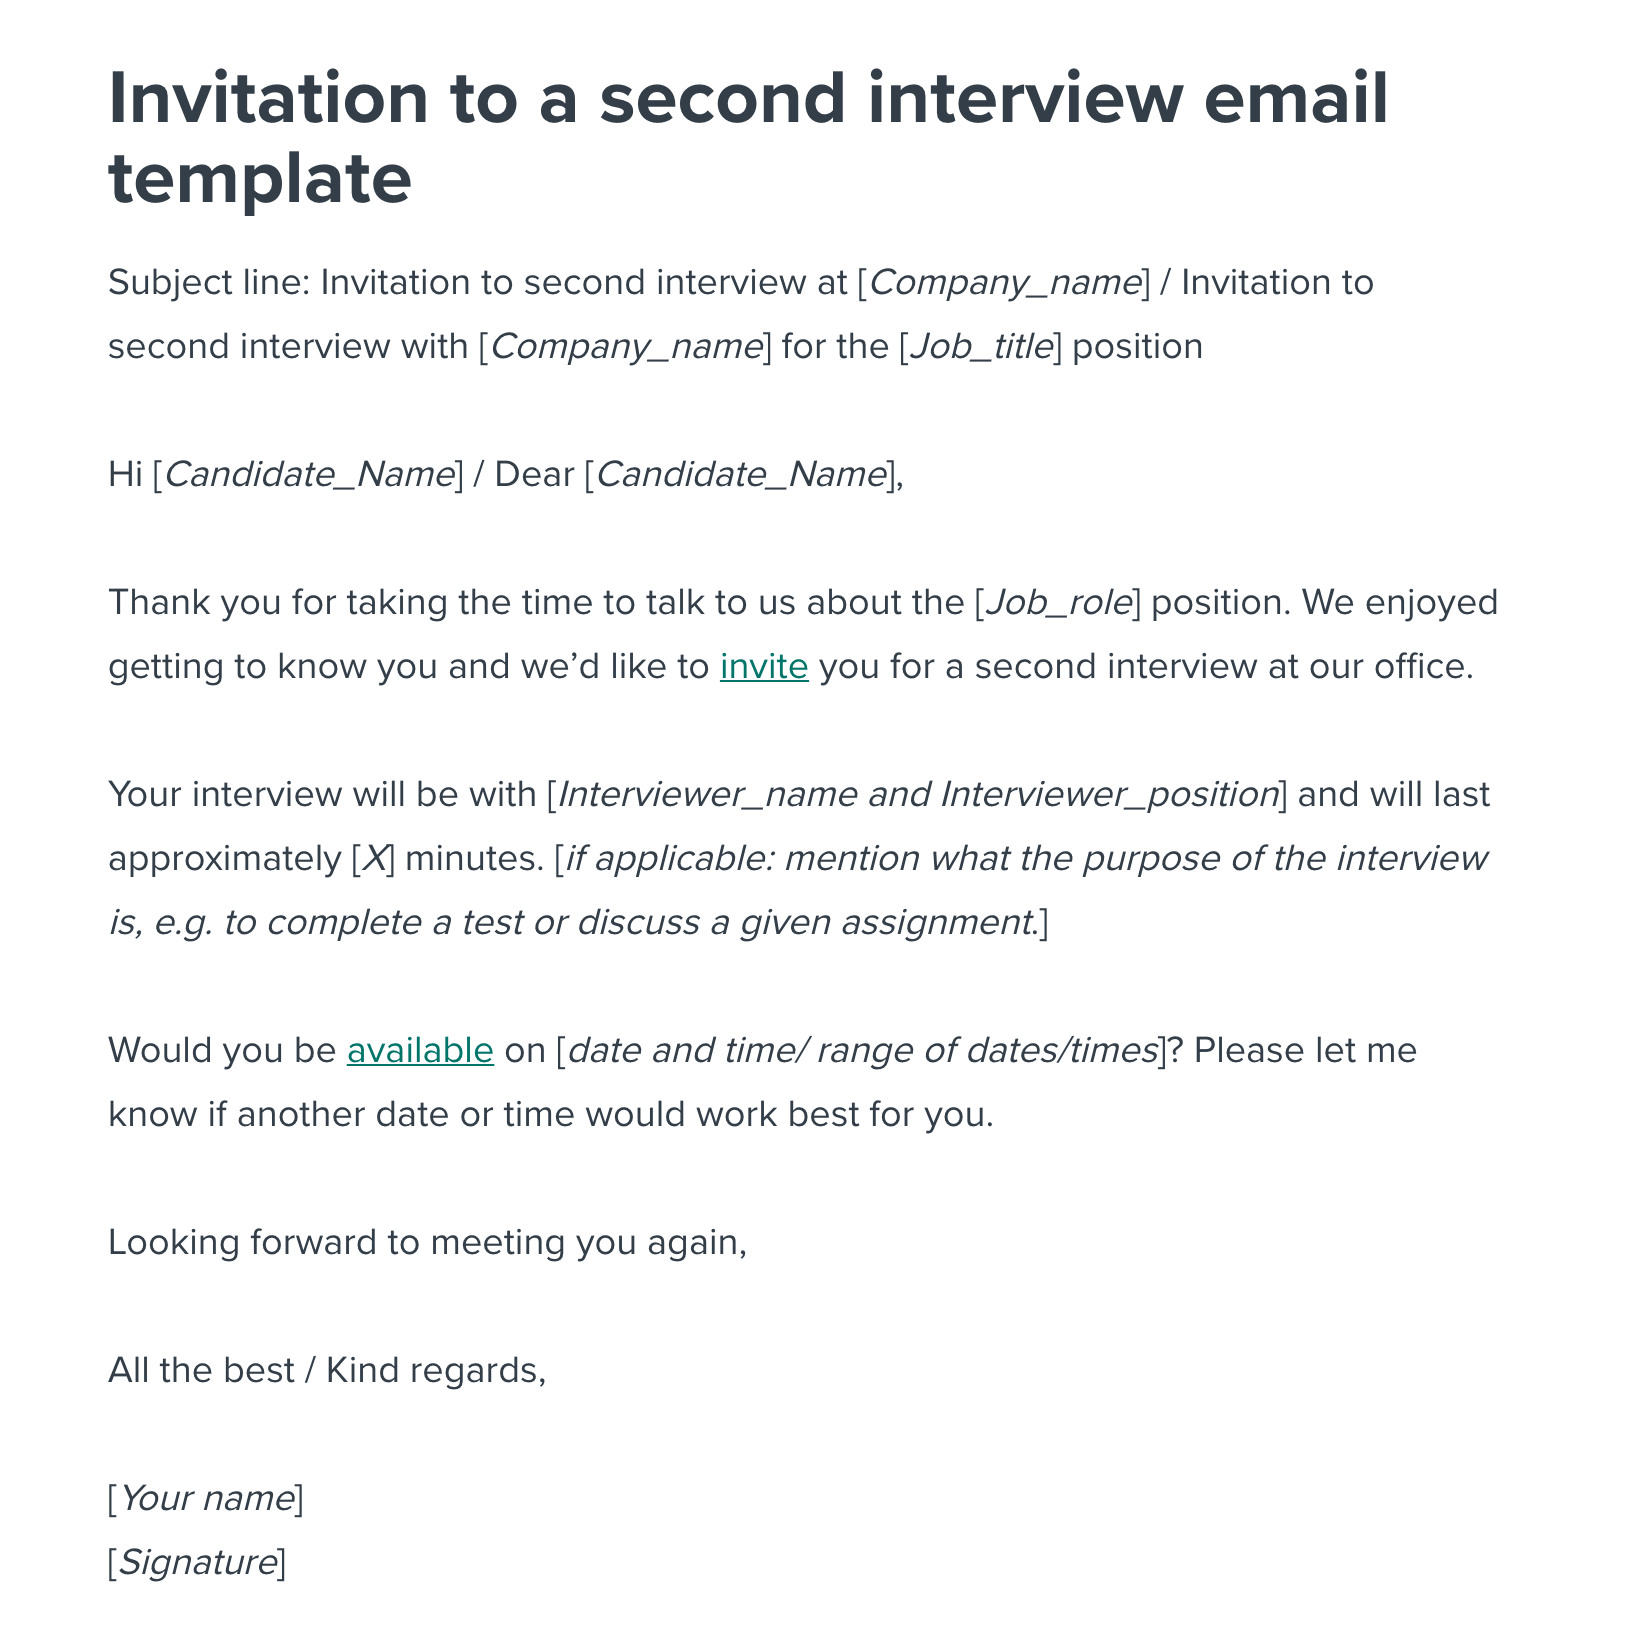 Second Interview Invitation Email Template | Workable